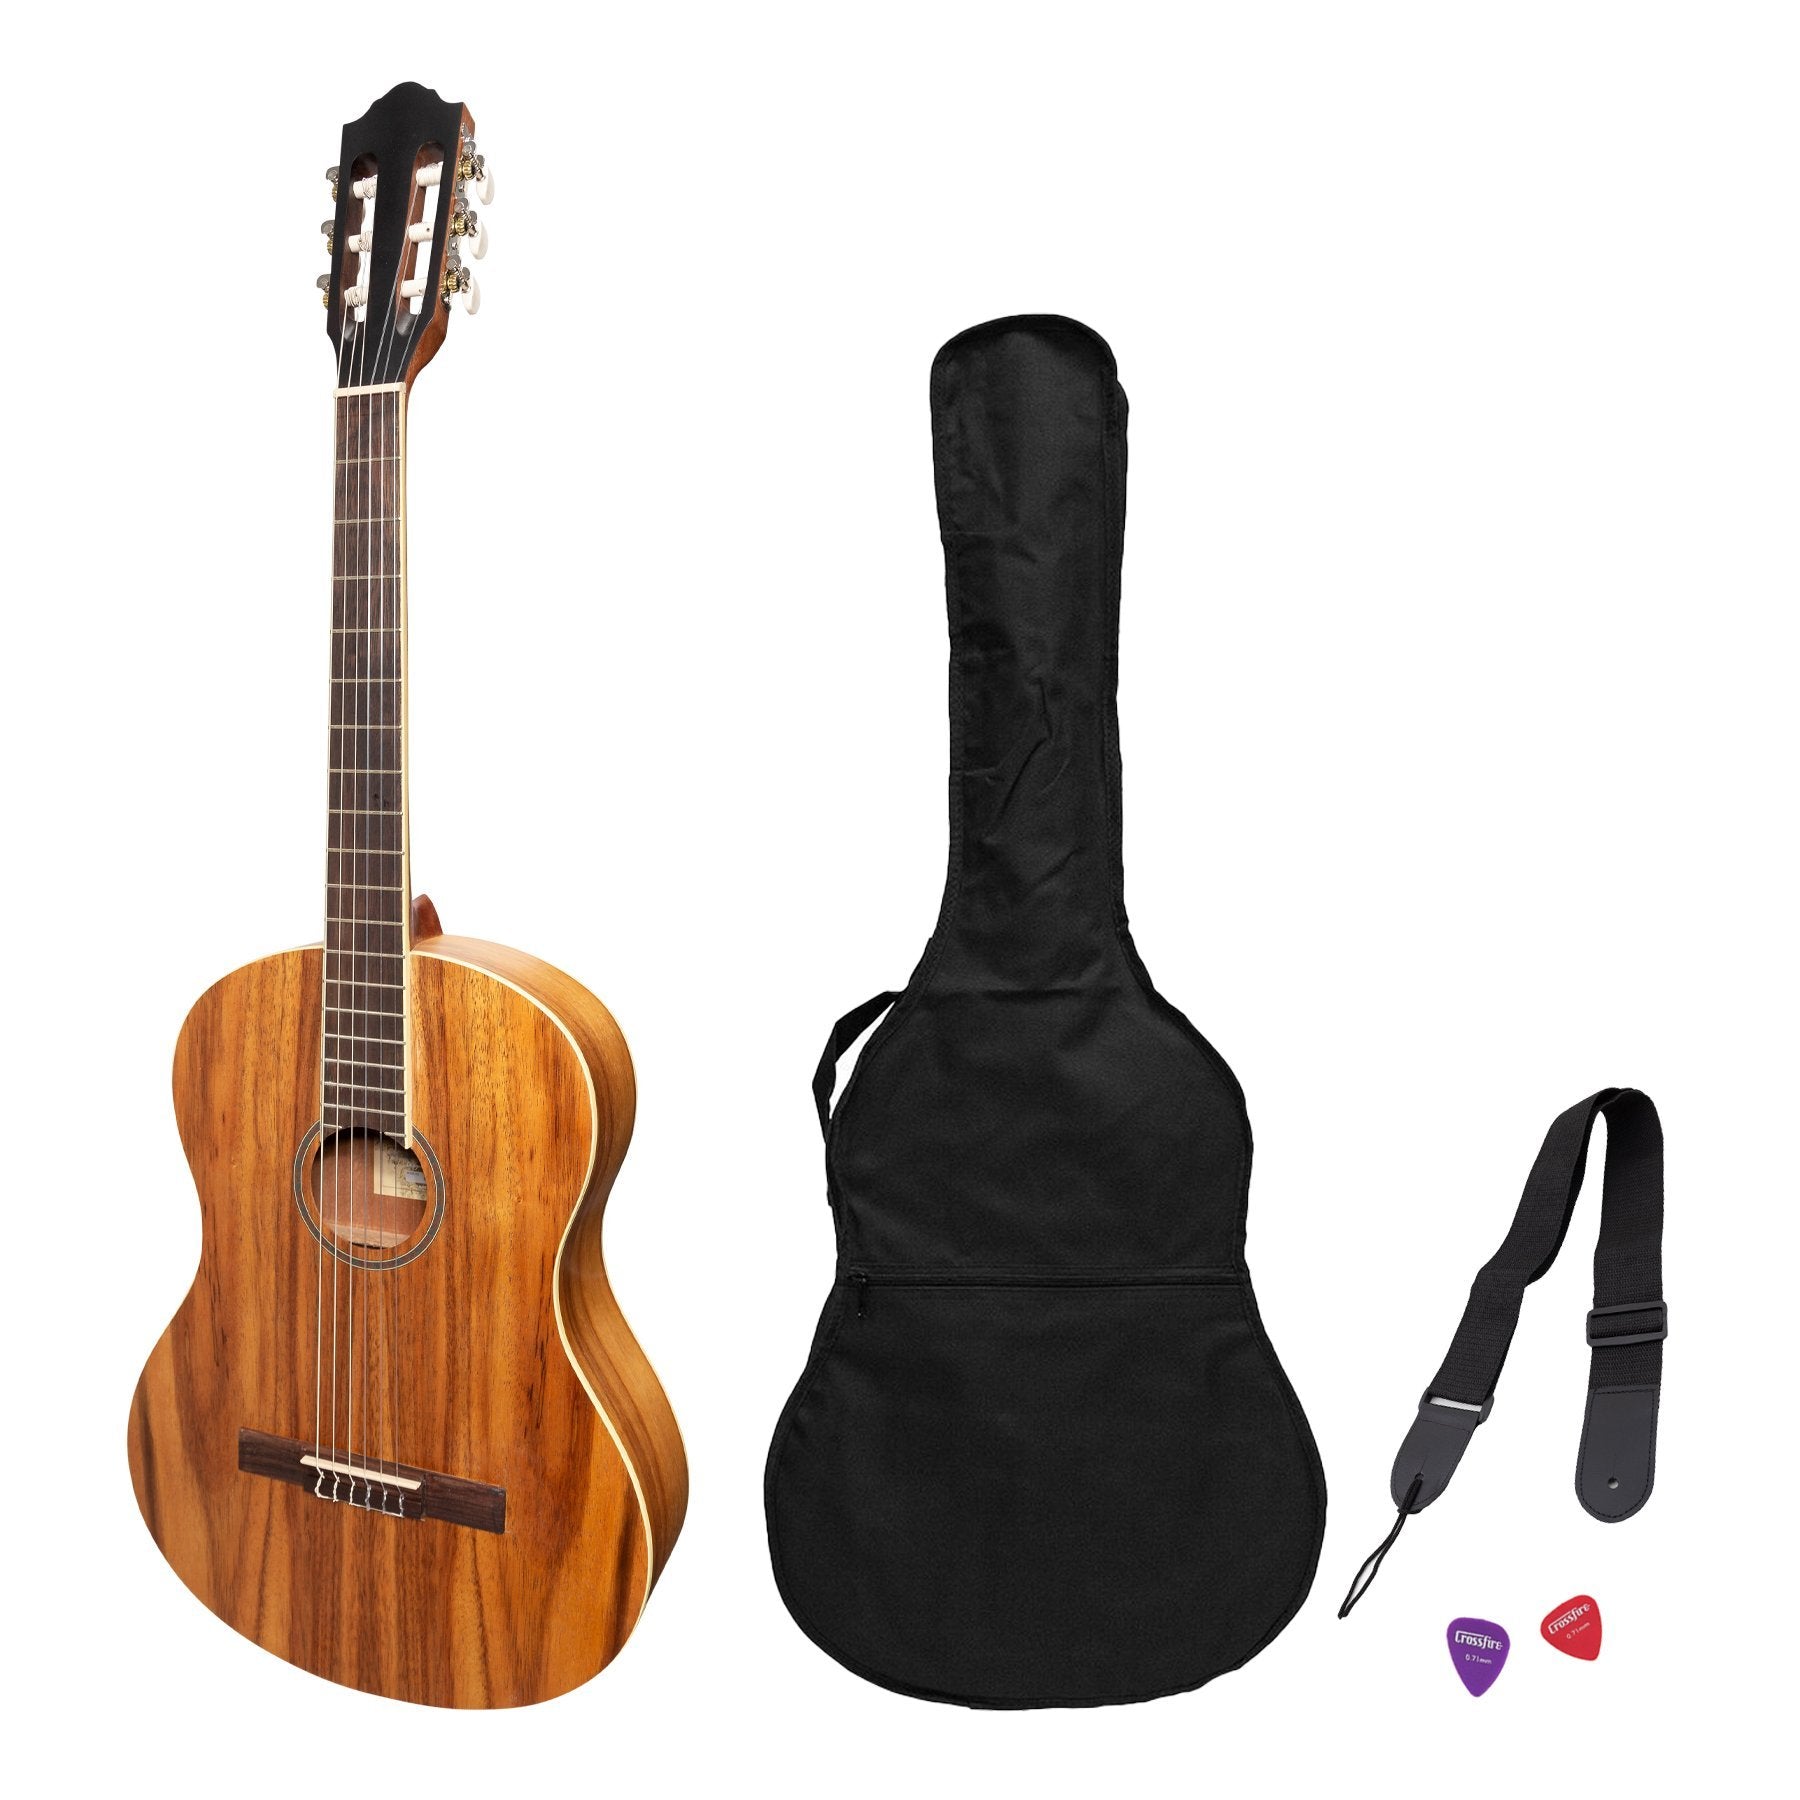 Martinez 'Slim Jim' Full Size Student Classical Guitar Pack with Built In Tuner (Rosewood)-MP-SJ44T-RWD